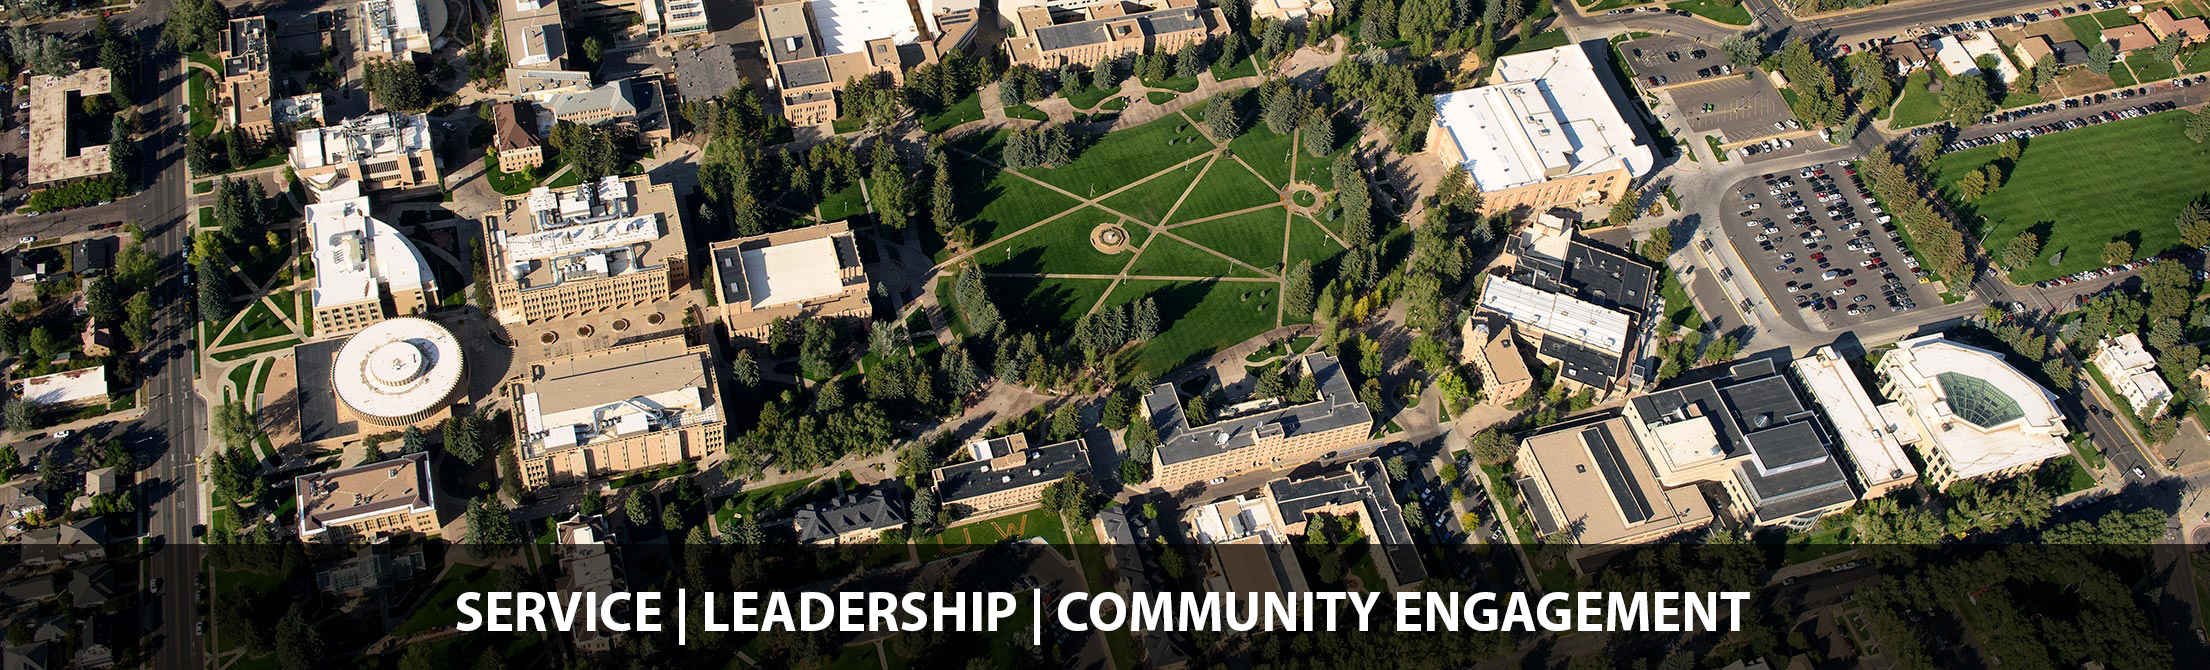 Arial shot of campus with "Service | Leadership | Community Engagement" written